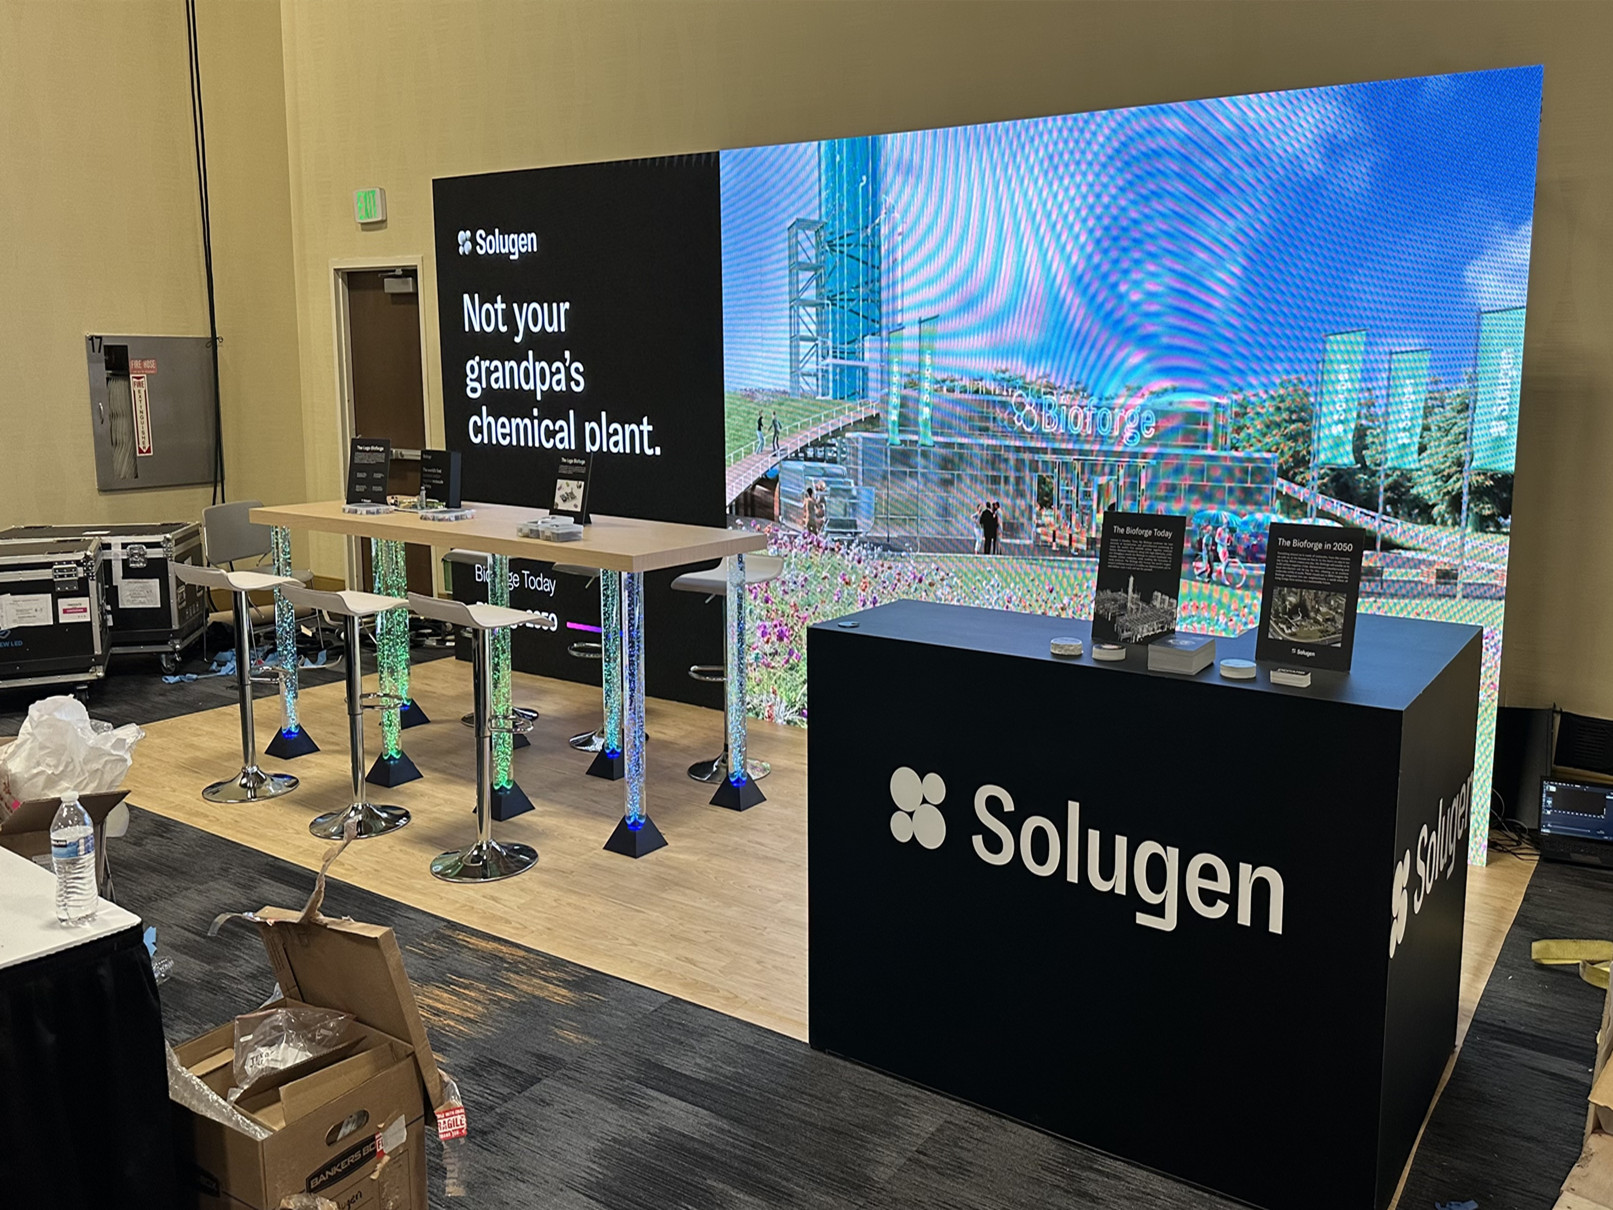 Solugen Led Video Wall Rendering Visual Representation Of How Things Will Turn Out Illuminated Reception Desk Exhibition Site Photos Trade Show